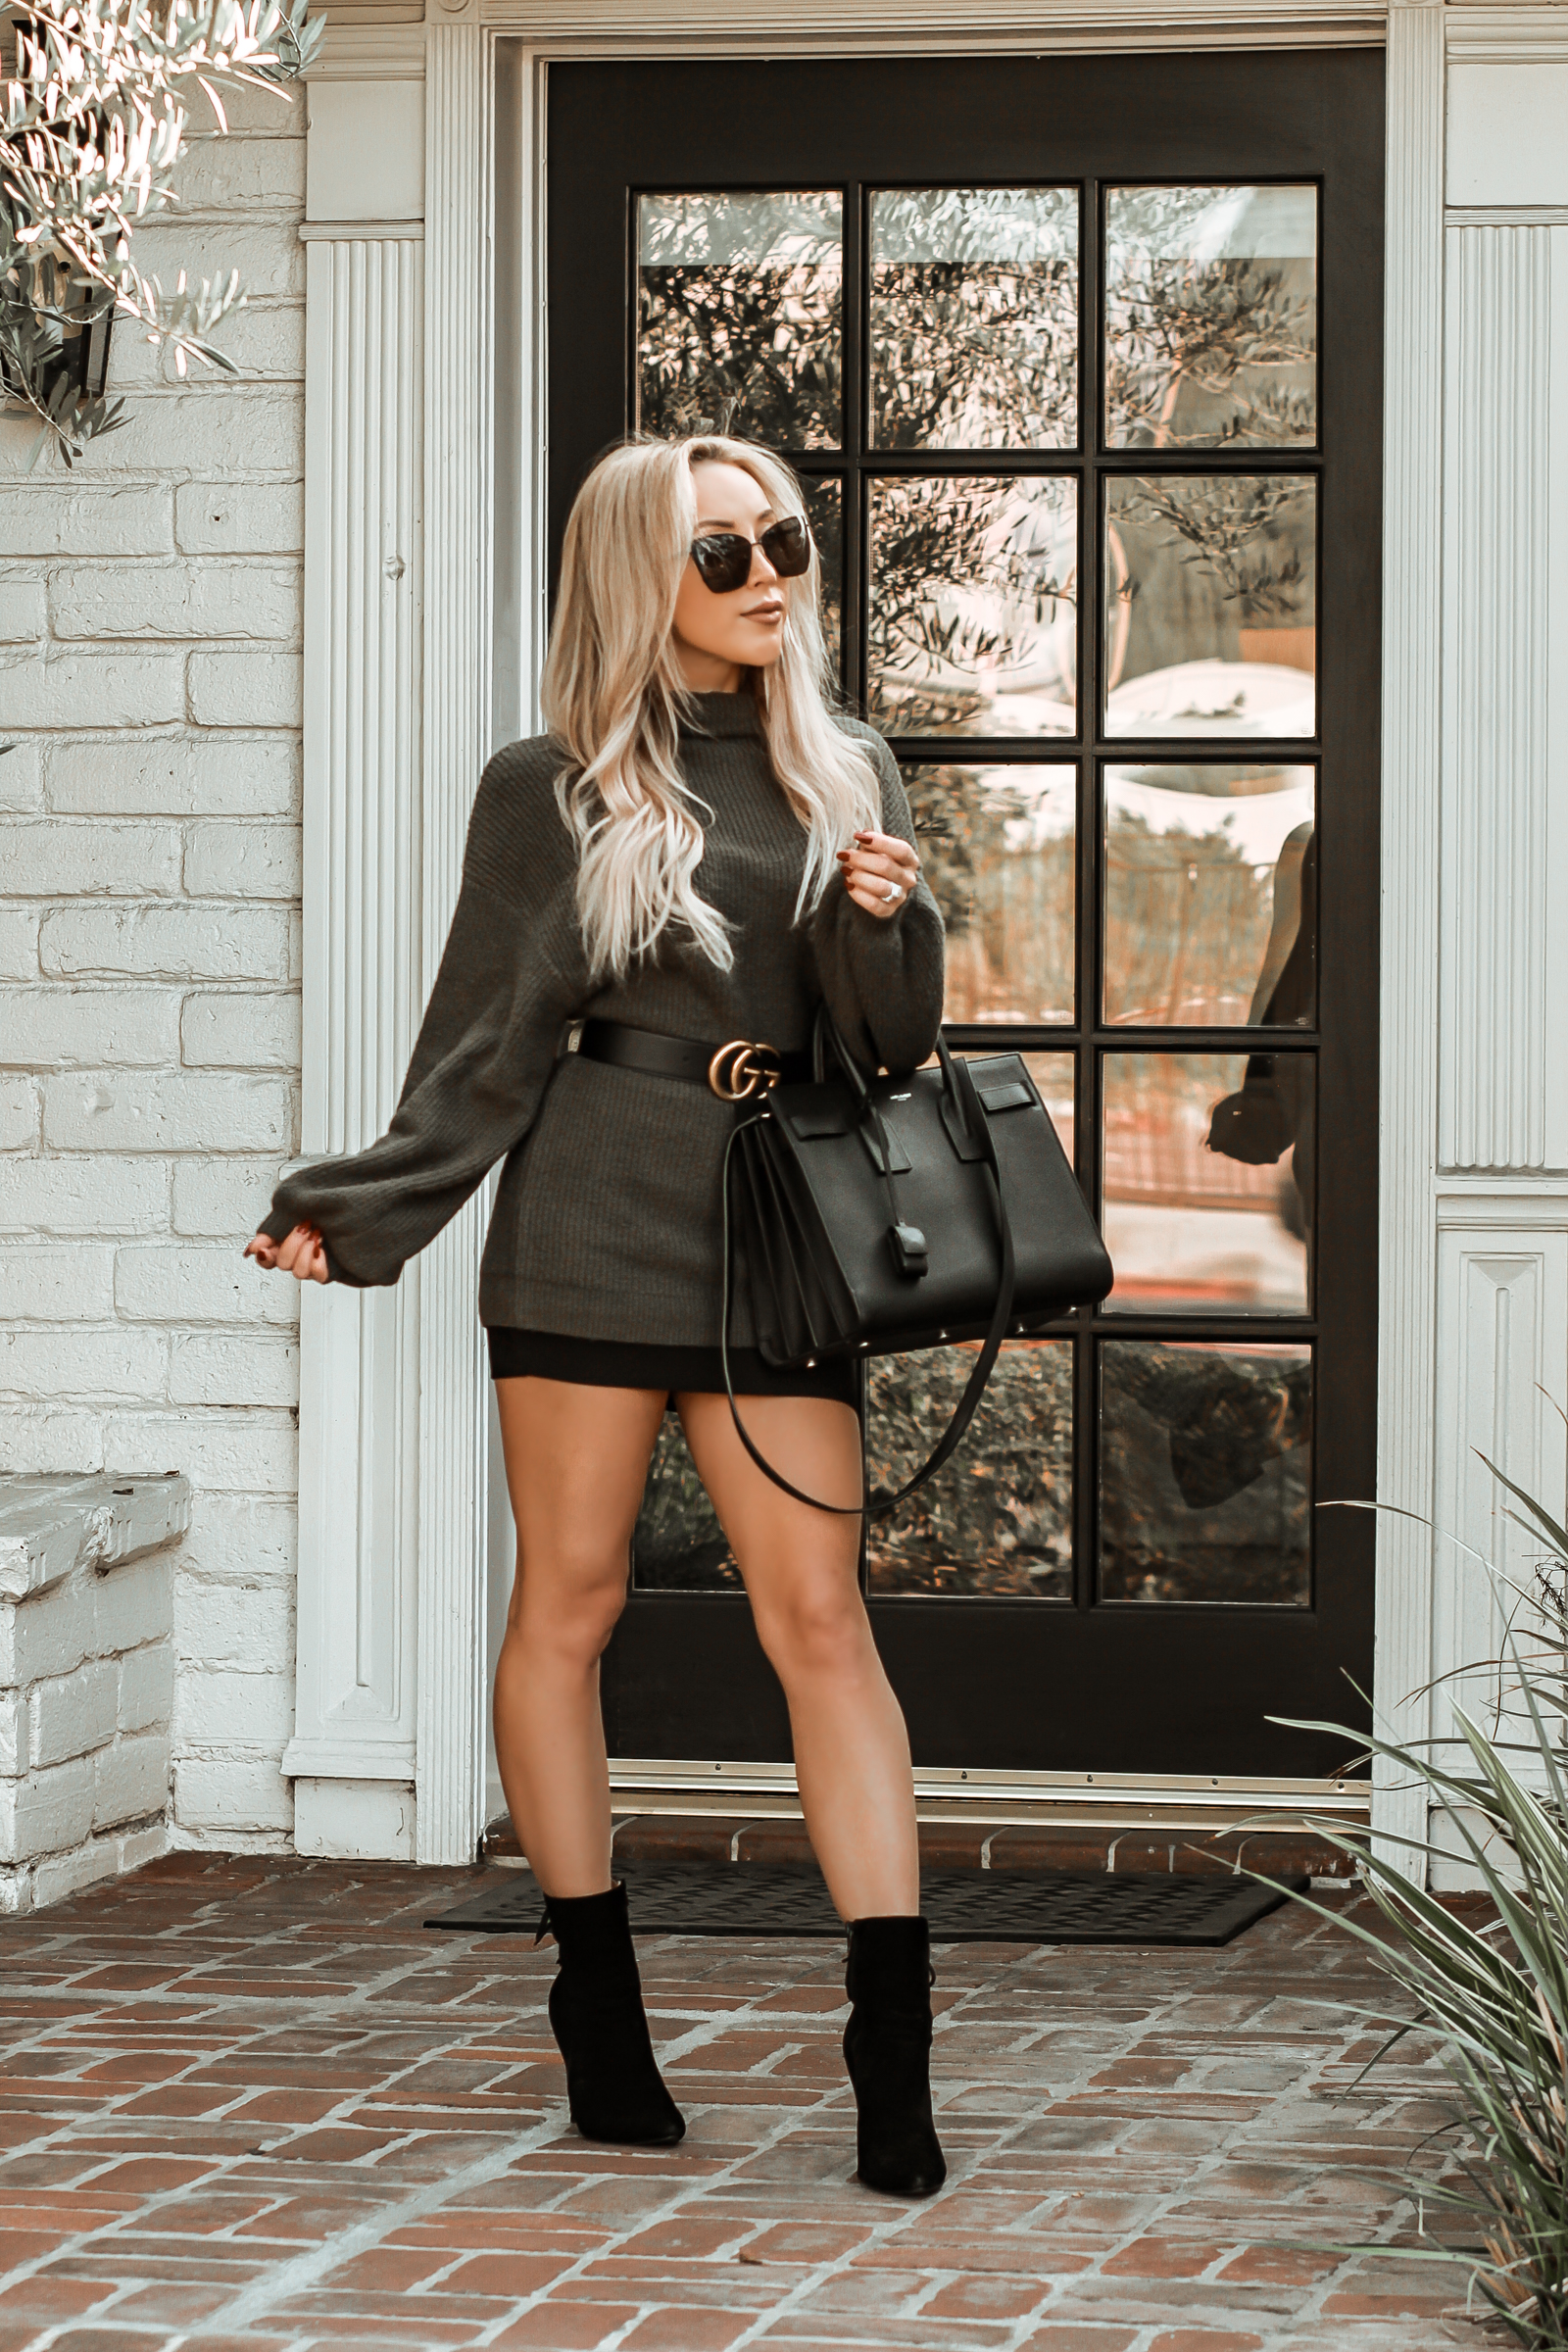 A Year in Review - 2018 | Blondie in the City by Hayley Larue